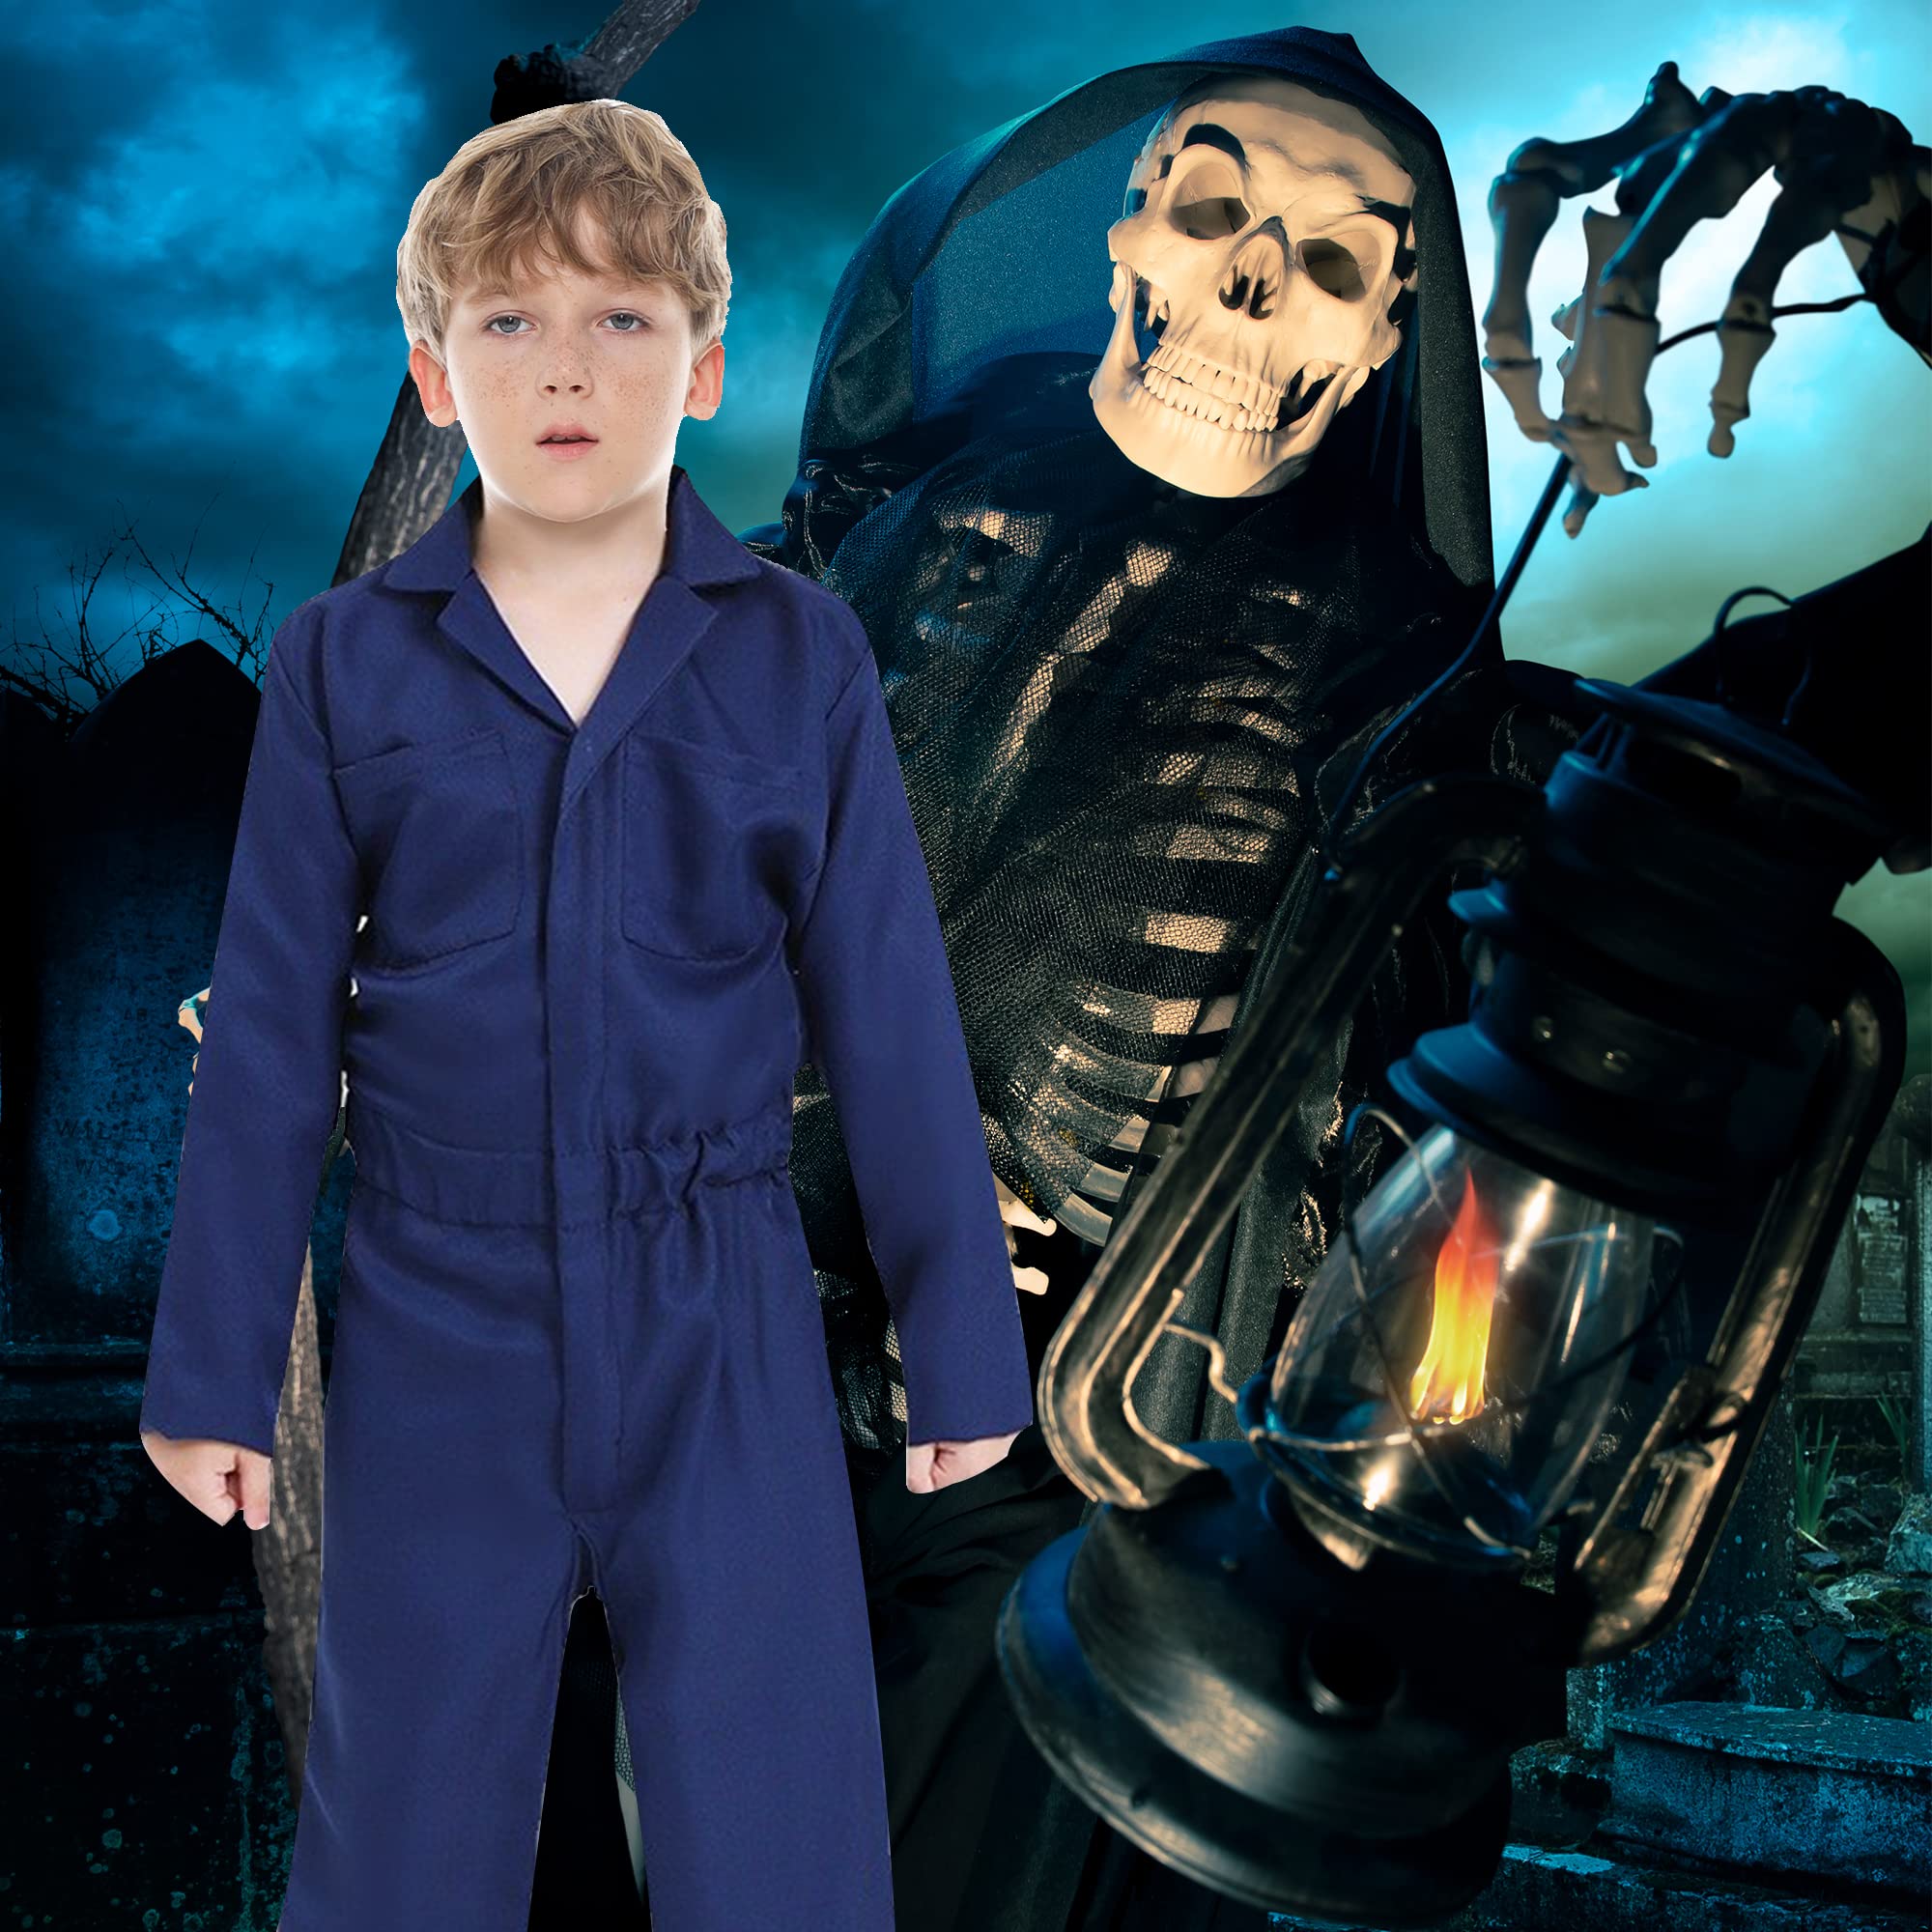 Firecos Halloween Horror Killer Cosplay Jumpsuit Coveralls Costume Props Halloween Costume with Mask for Kids Boys